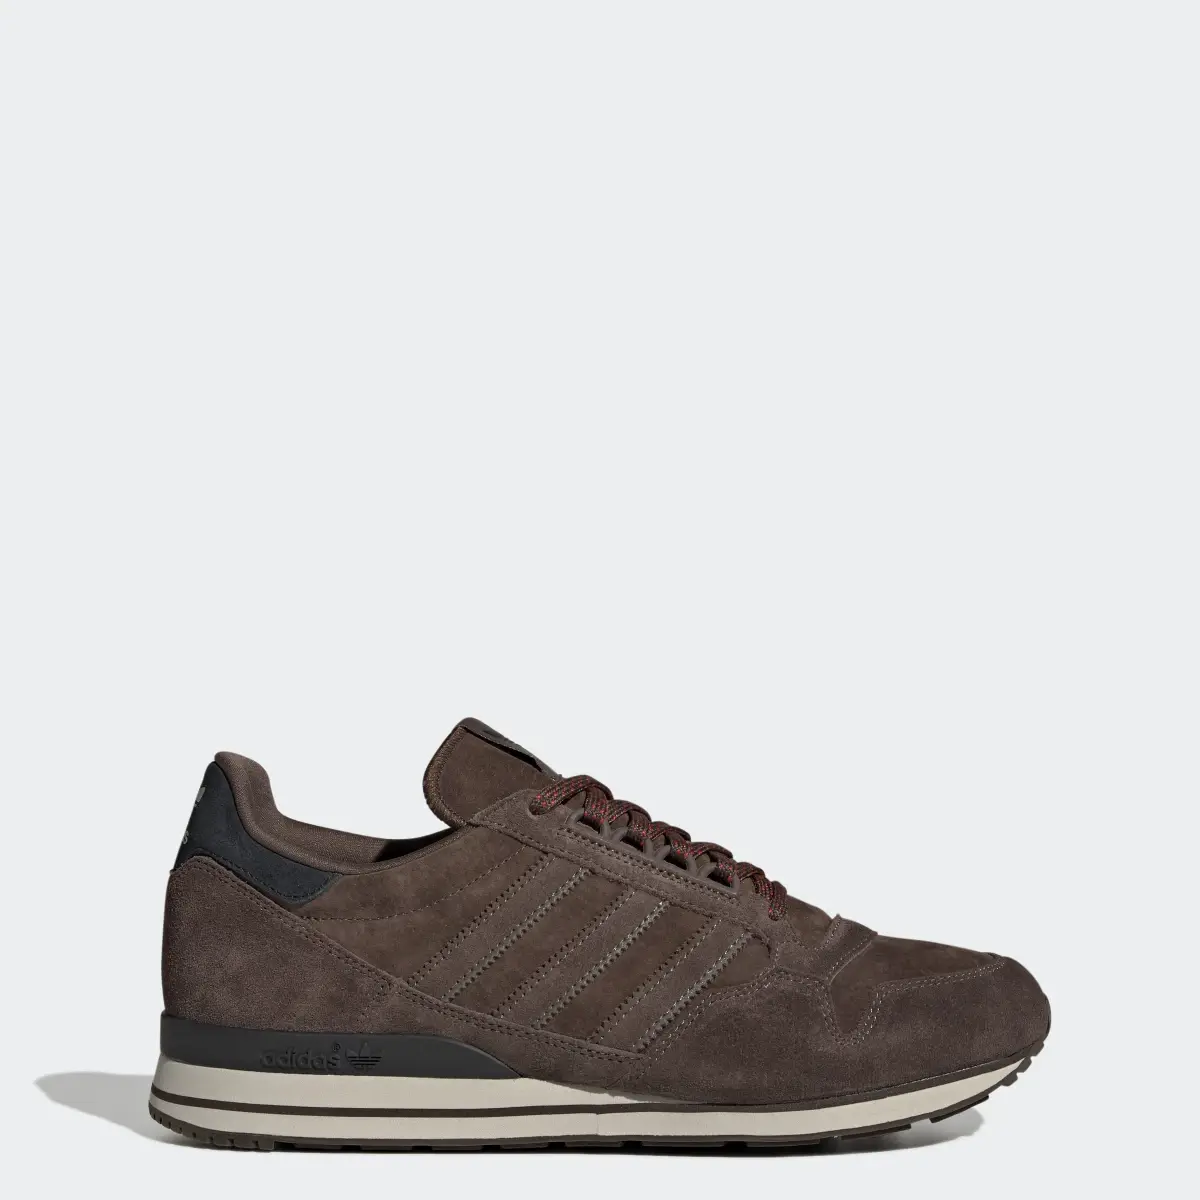 Adidas ZX 500 Shoes. 1